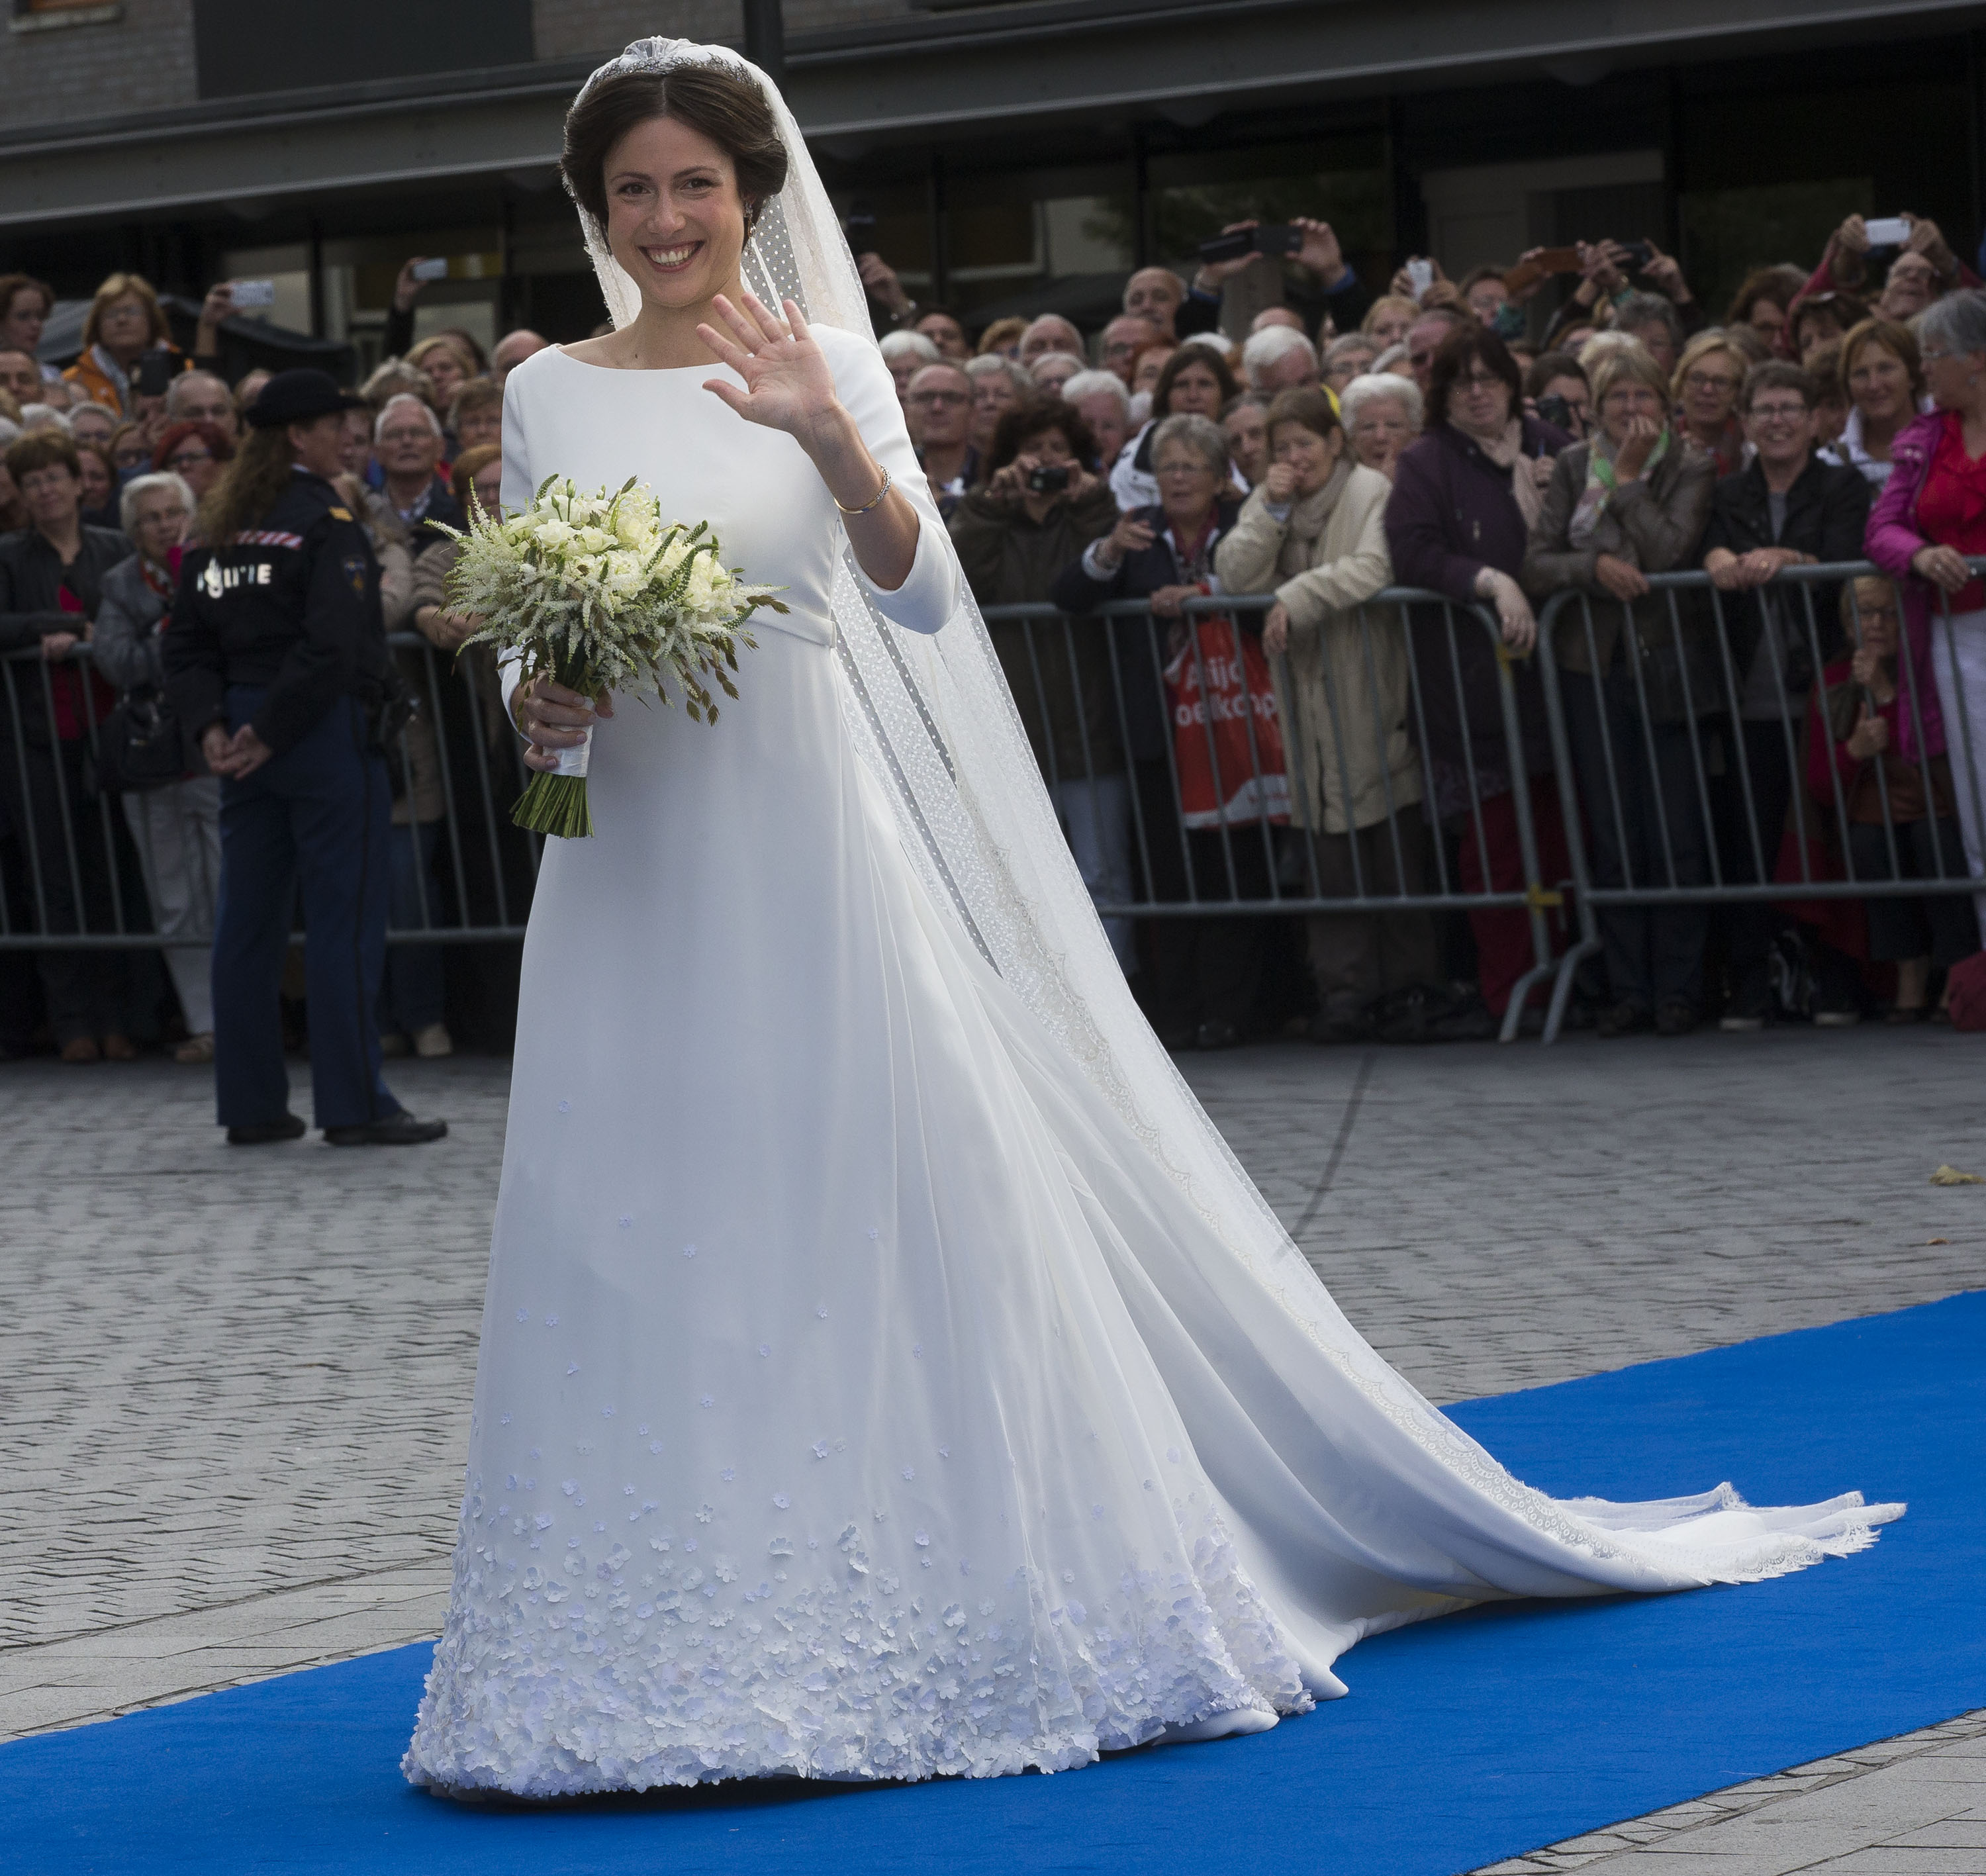 Well Played, Yet Another Random European Royal Wedding - Go Fug Yourself: Because ...3000 x 2834